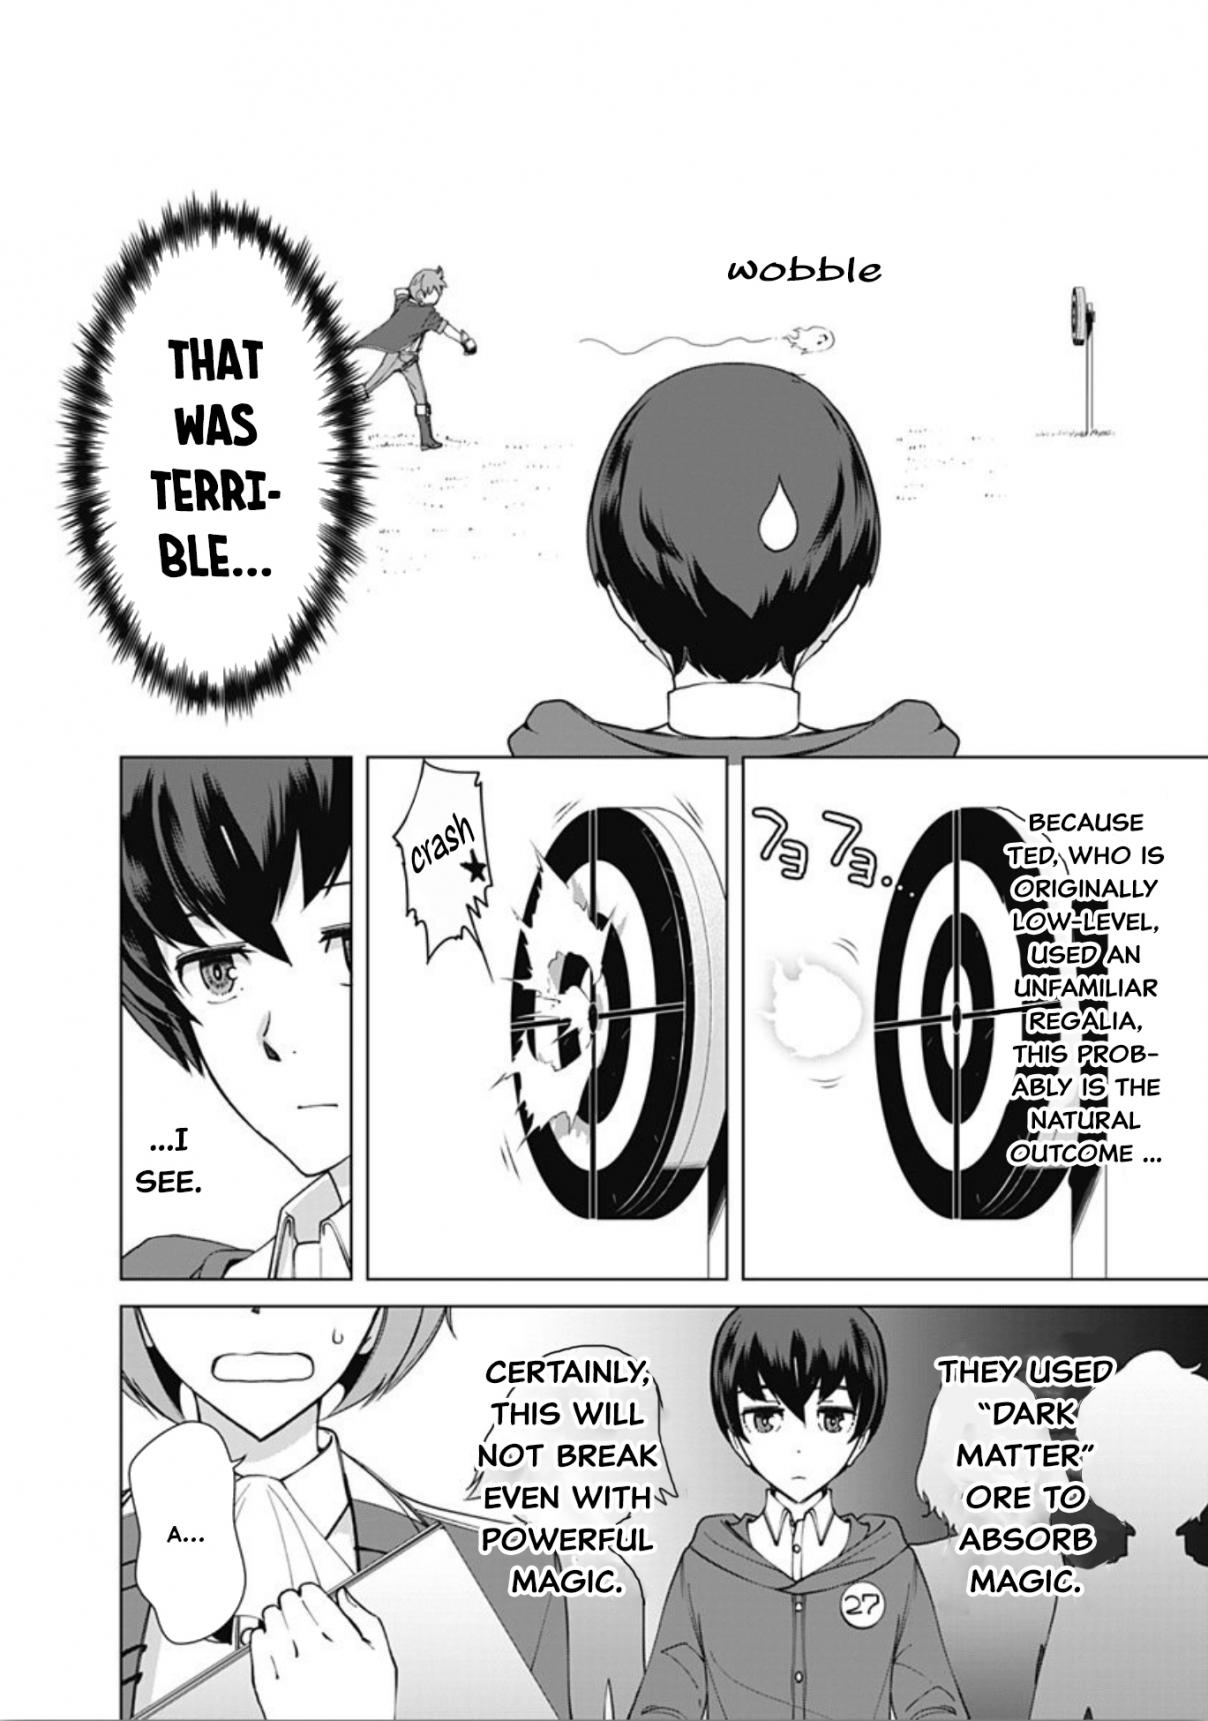 The Reincarnation Magician Of The Inferior Eyes Vol. 1 Ch. 9